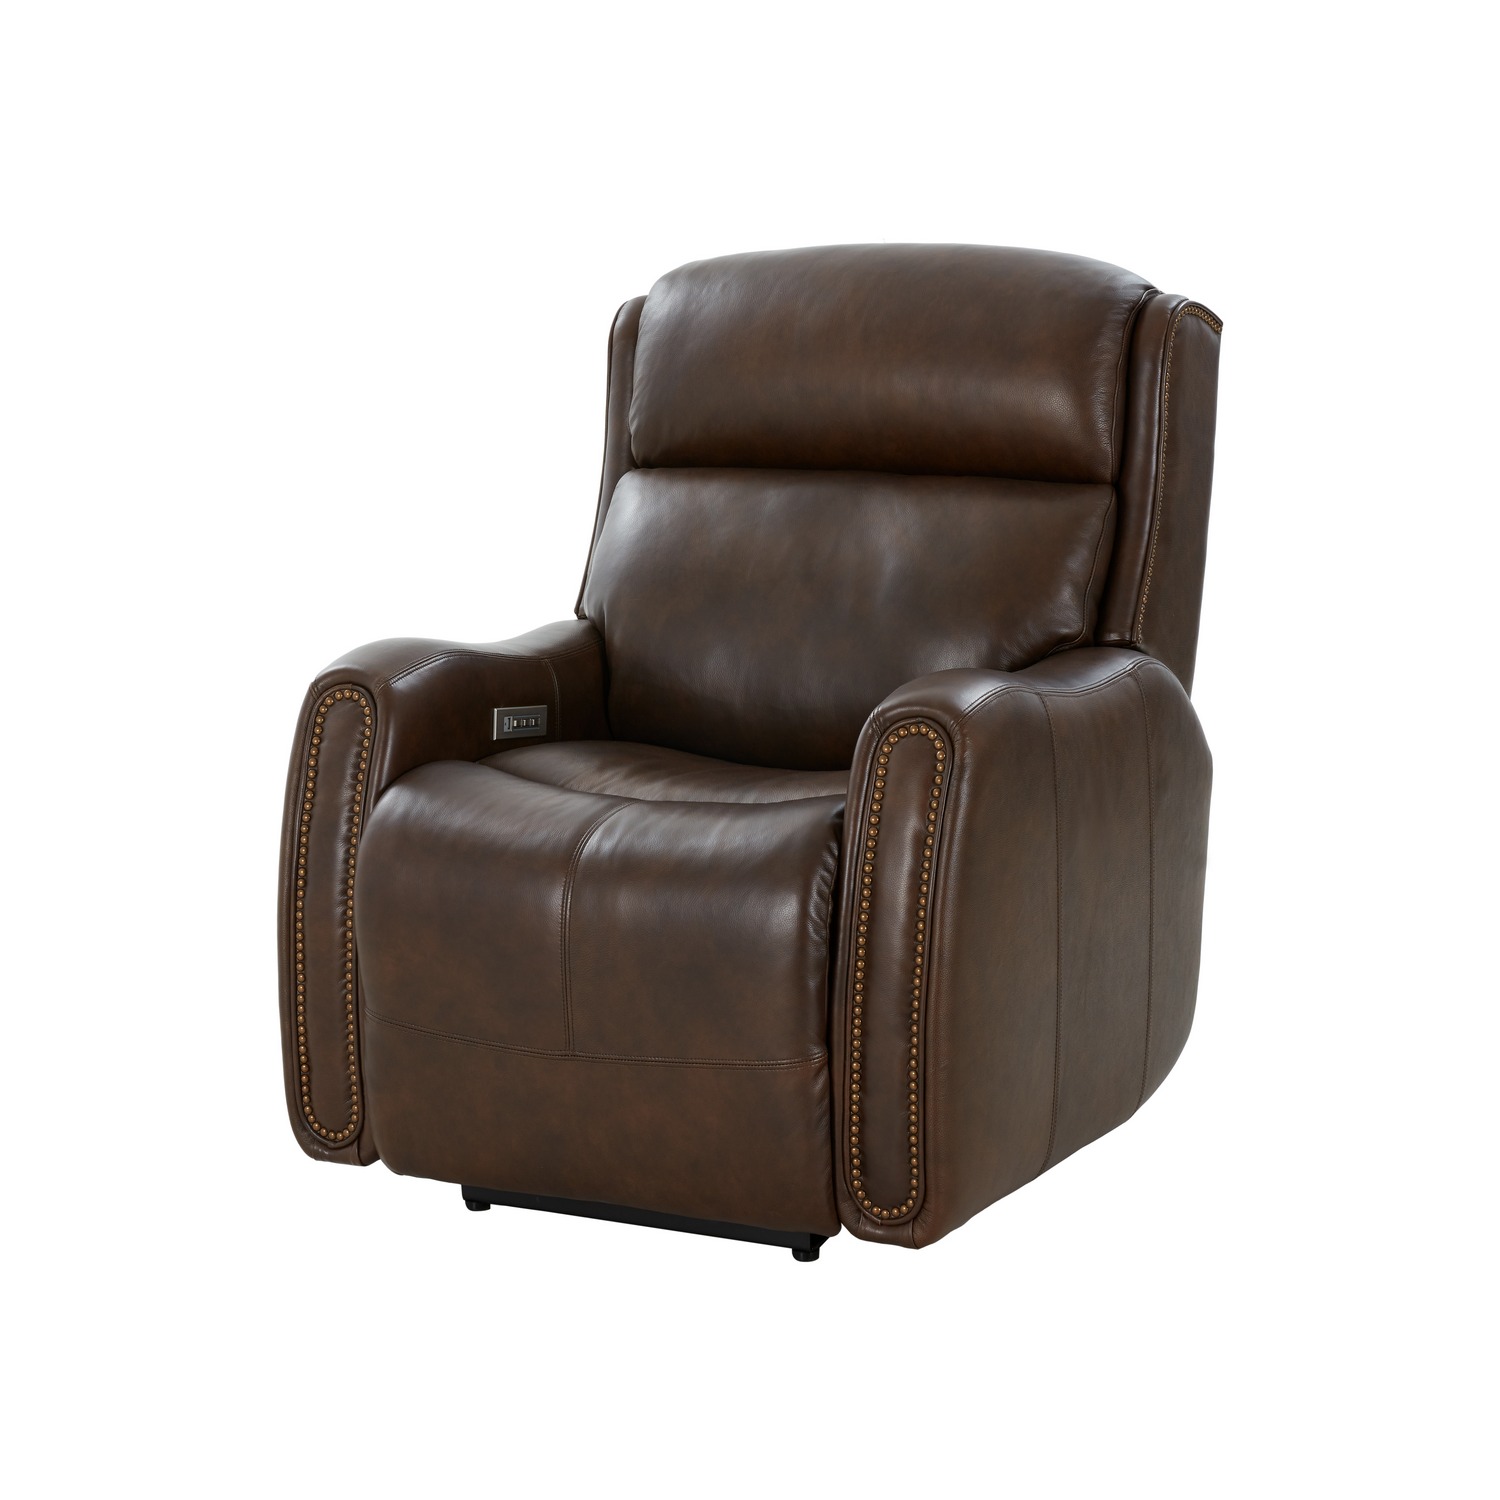 Barcalounger Brookside Power Recliner Chair with Power Head Rest and Power Lumbar - Ashford Walnut/All Leather